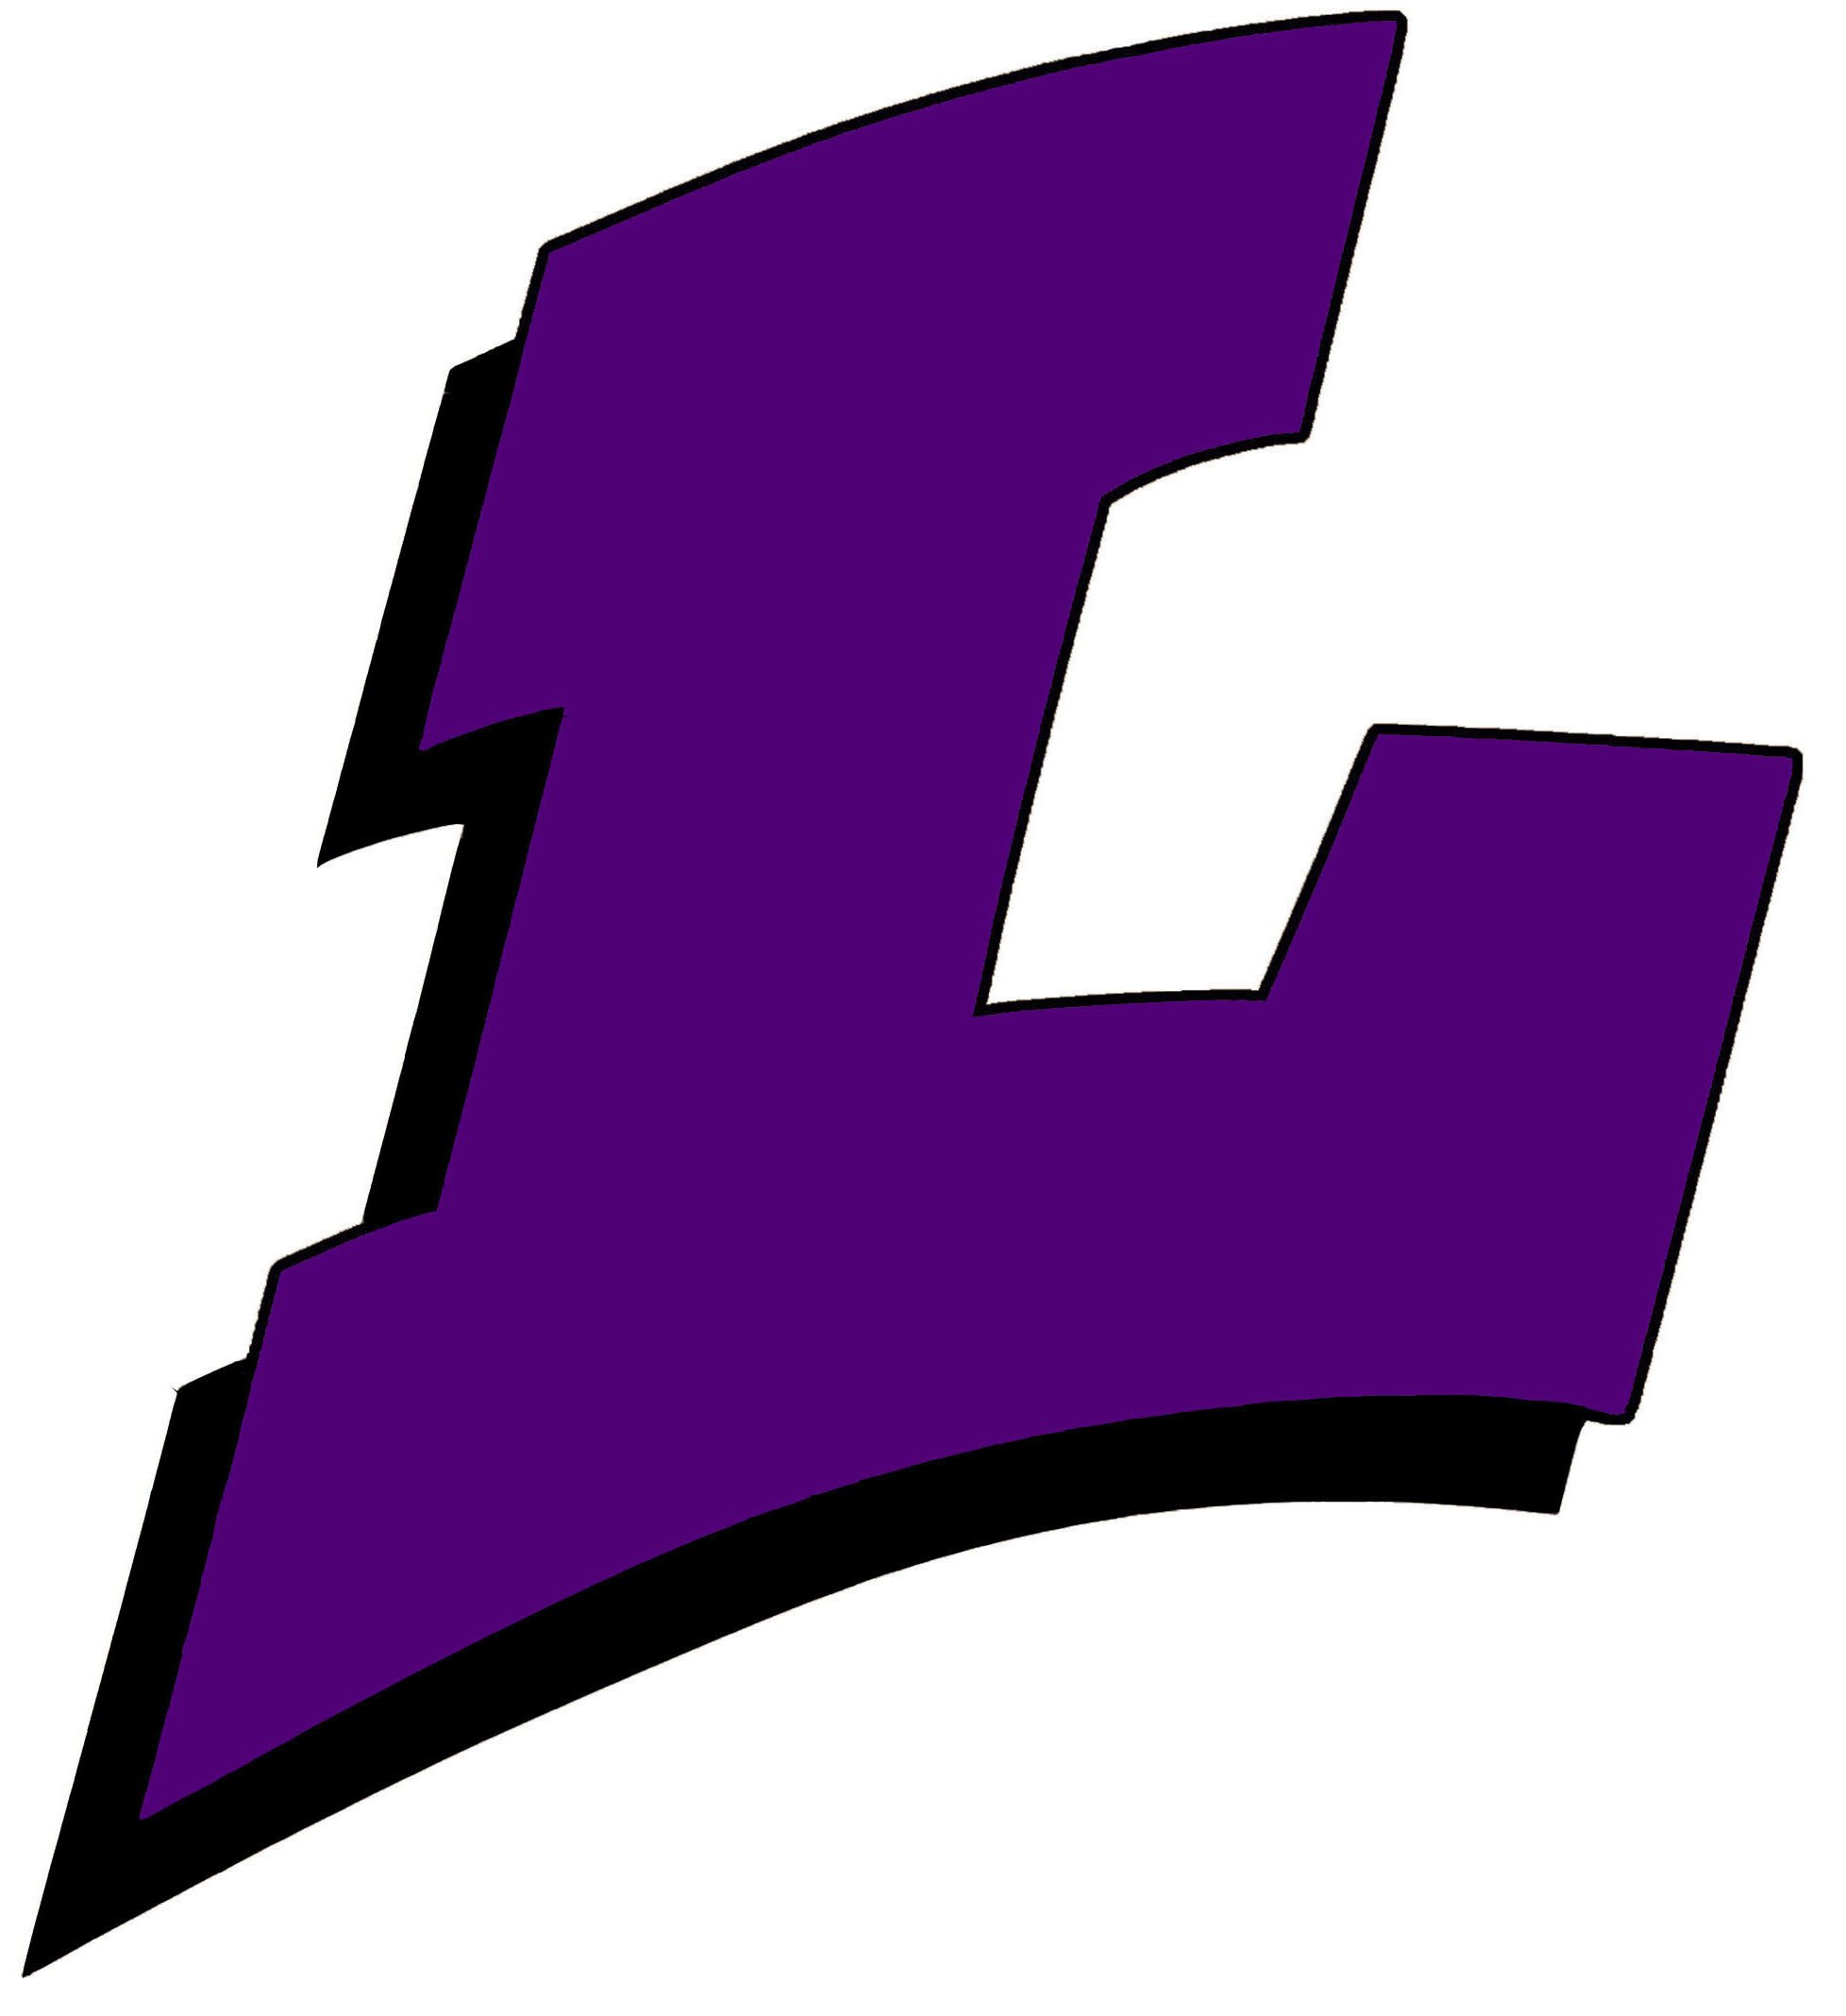 Official twitter feed of Lehi High School. Follow for updates on dates and other important school information directly from the school offices.